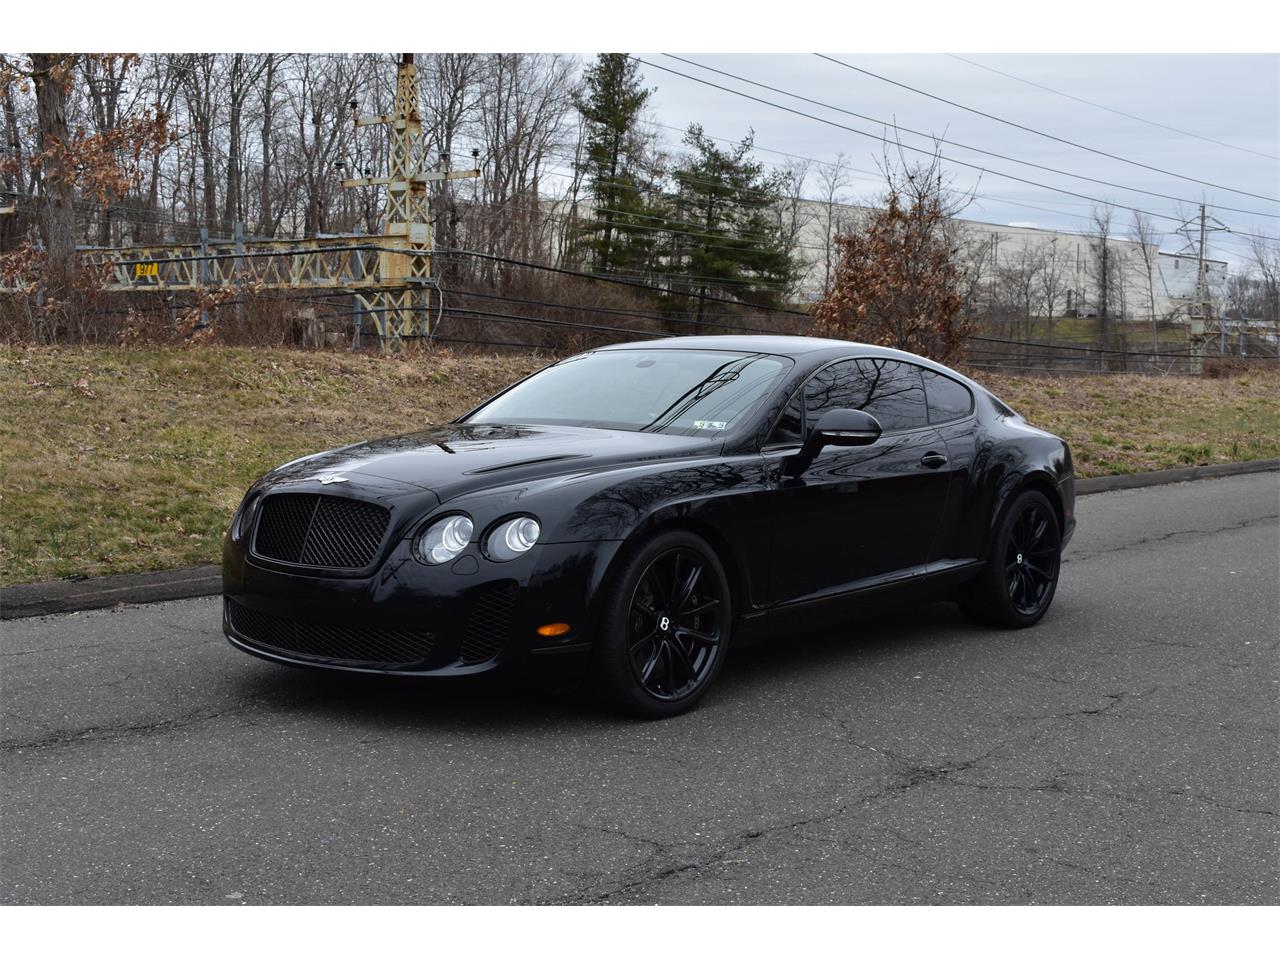 2011 Bentley Continental Supersports for sale in Orange, CT